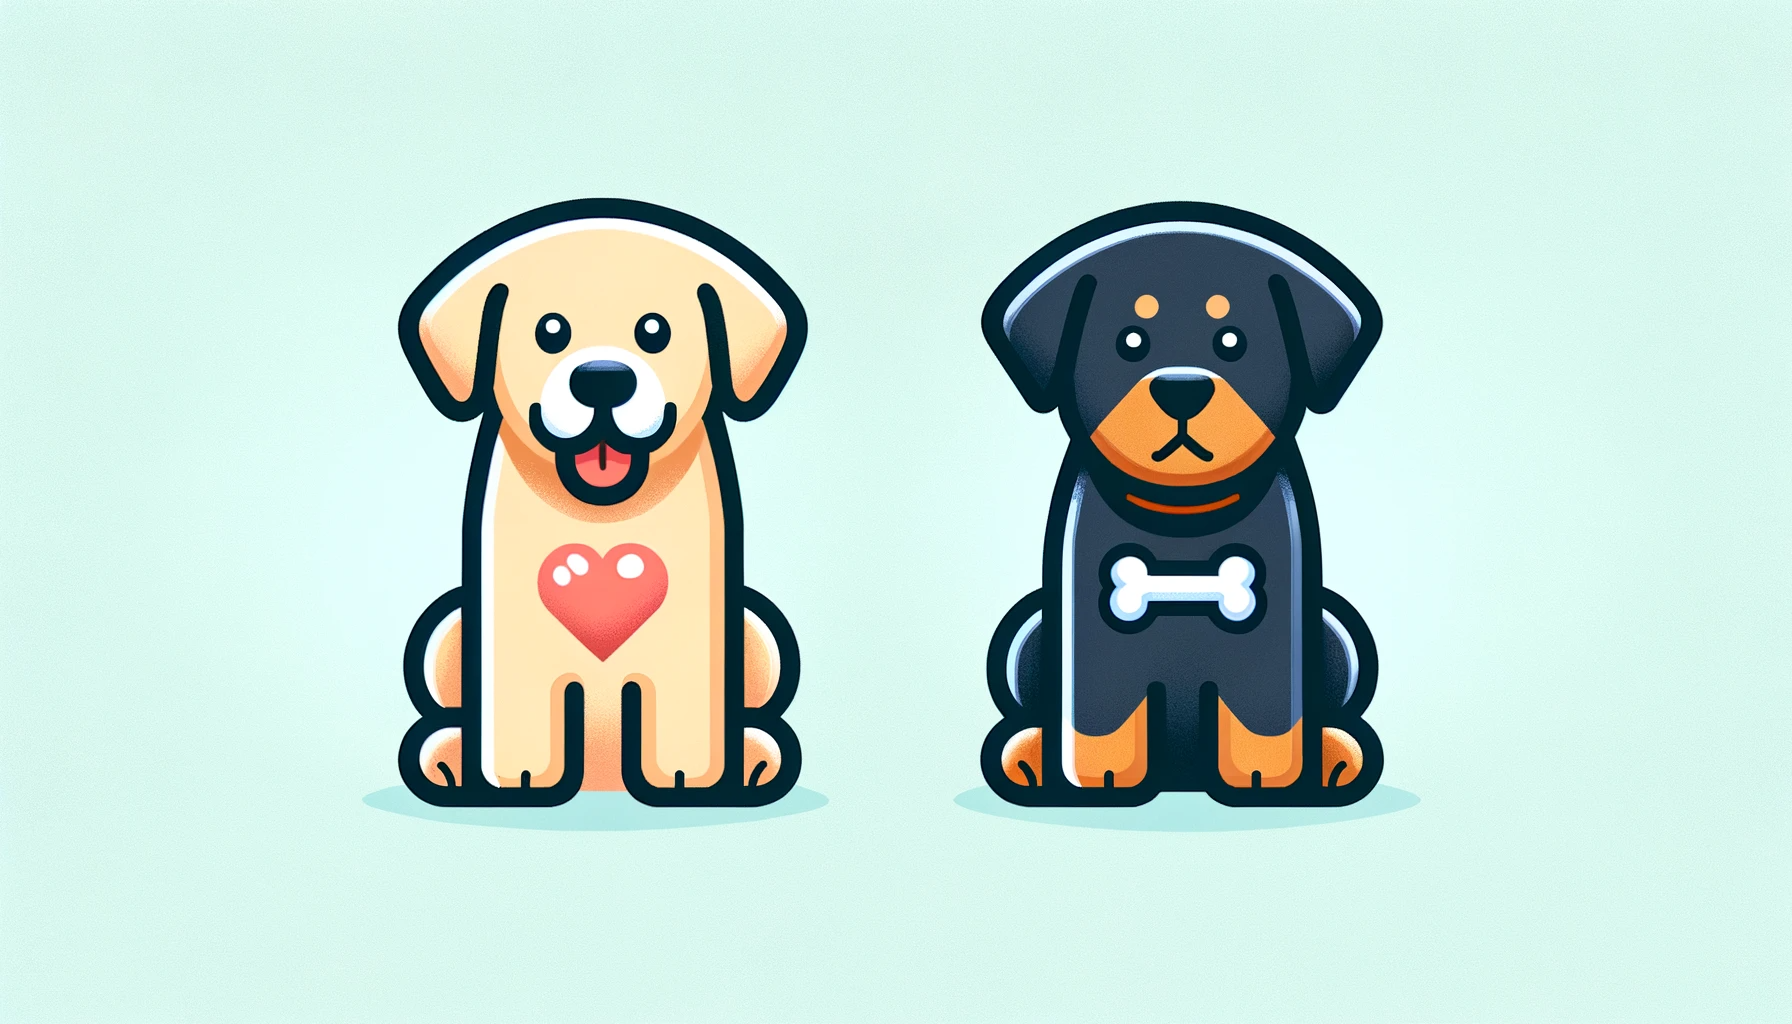 Cartoonish Labrador and Rottweiler icons with health symbols like hearts and bones, spotlighting the health issues common to each parent breed